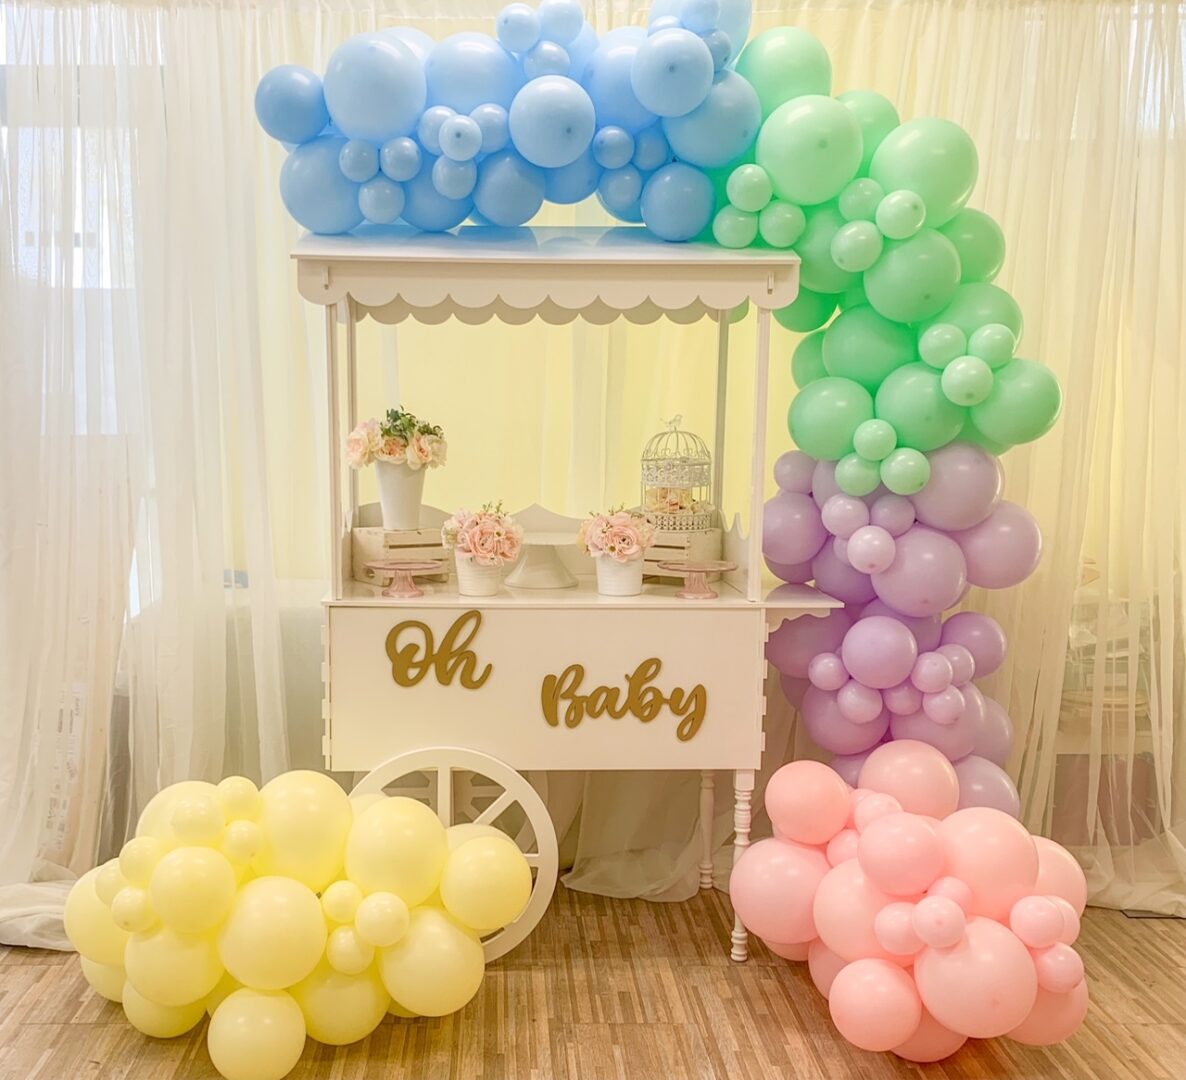 A baby shower cart with balloons and decorations.